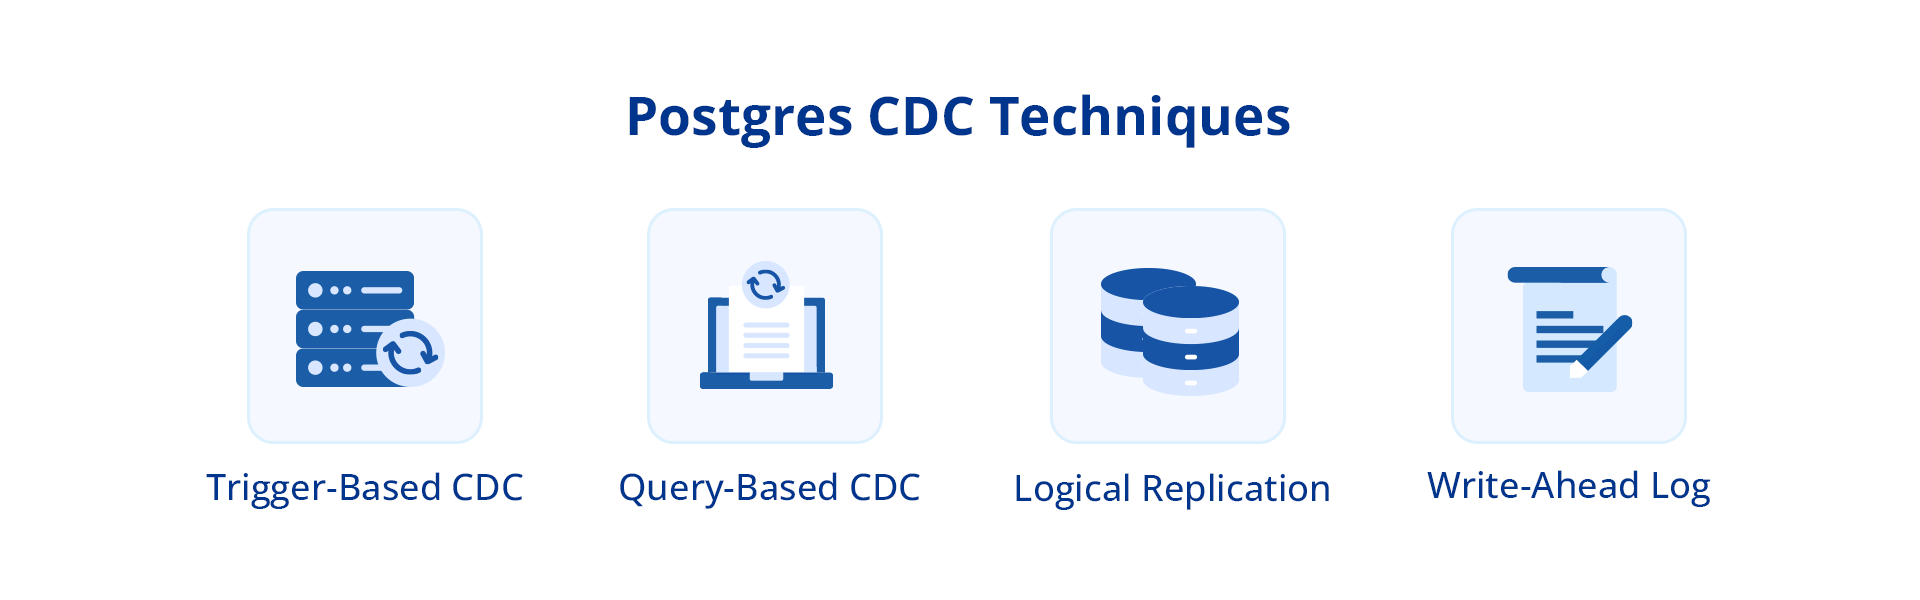 A graphic showing the different types of PostgreSQL CDC techniques.